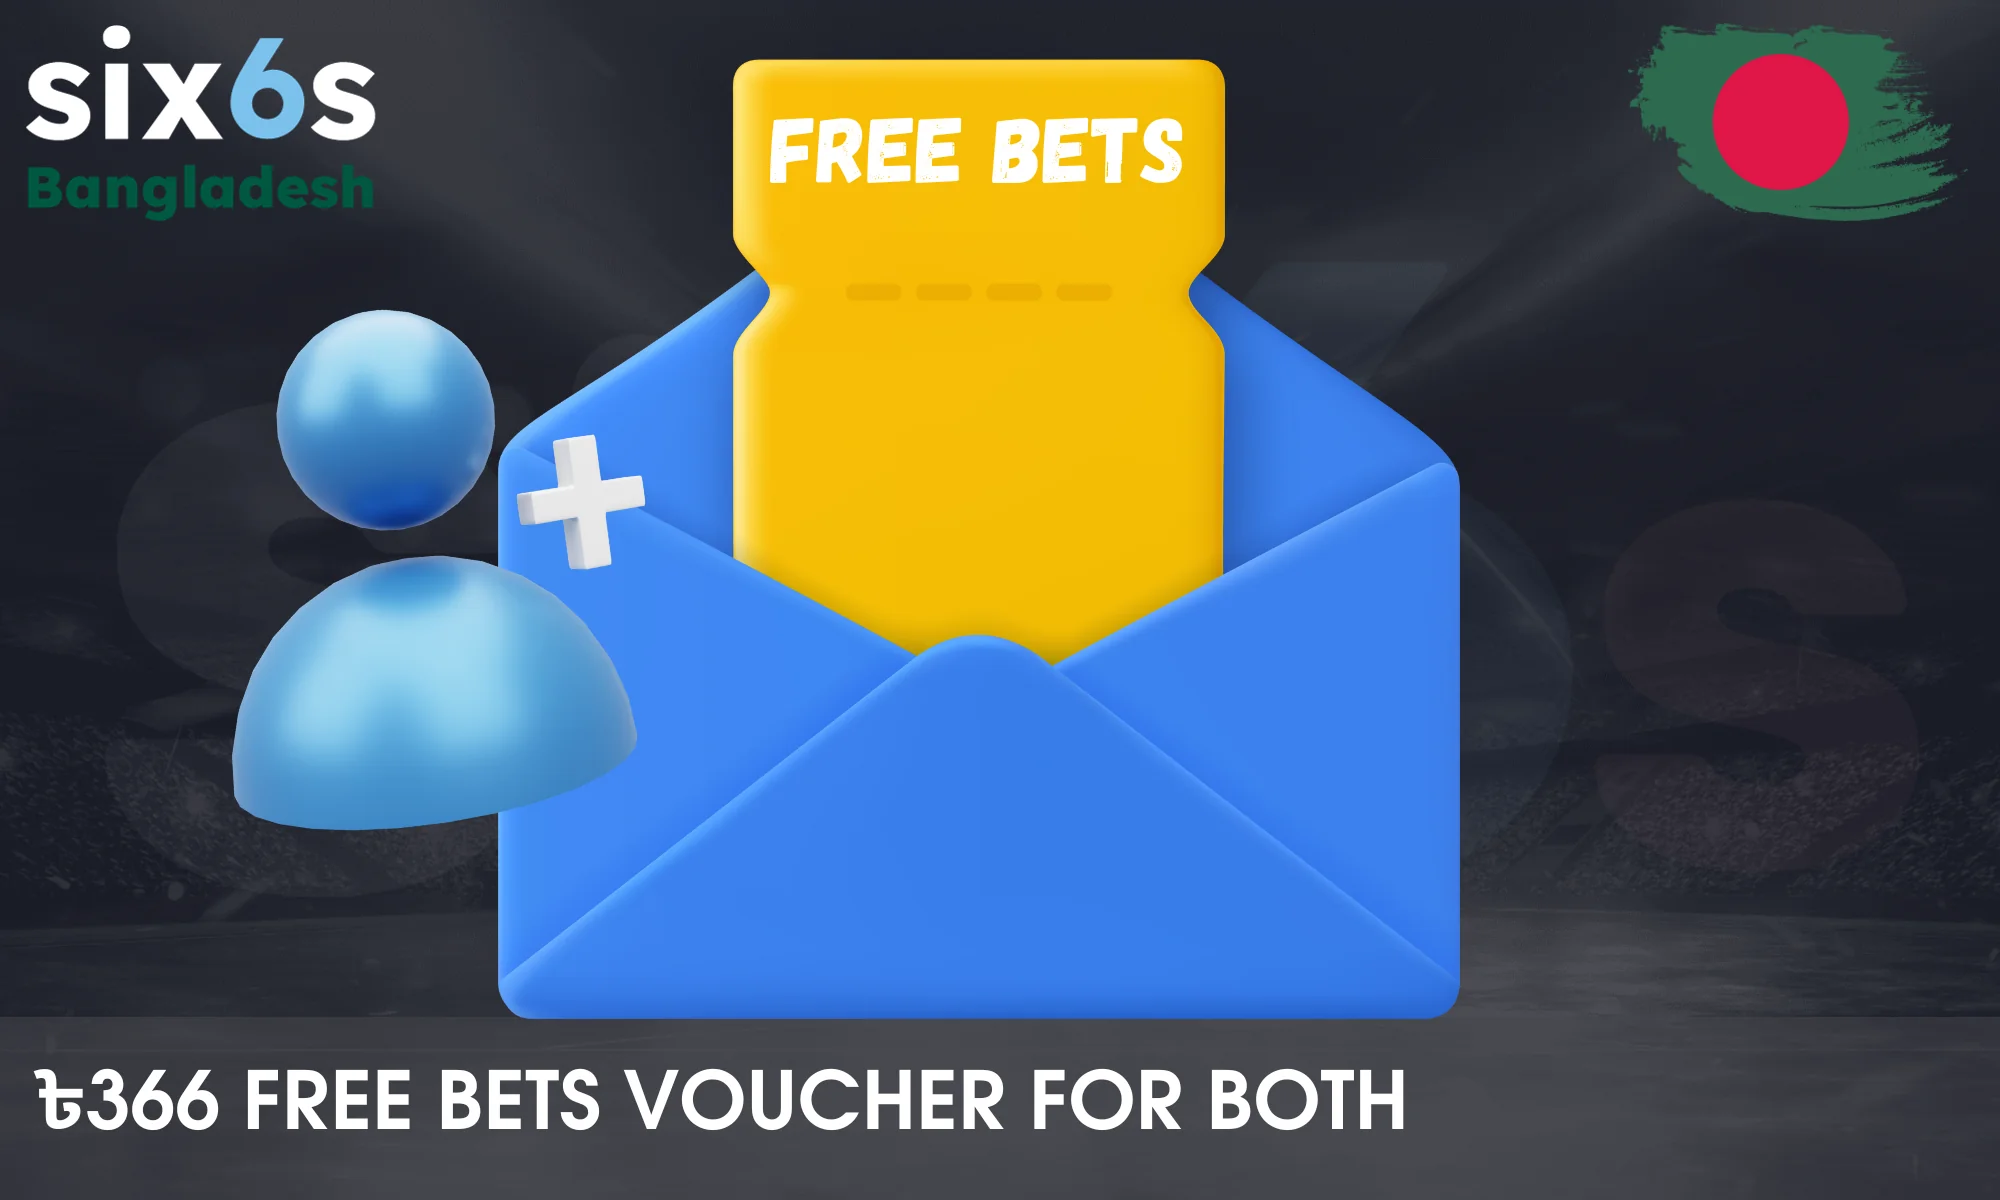 Six6s referral bonus up to ৳366 free bets